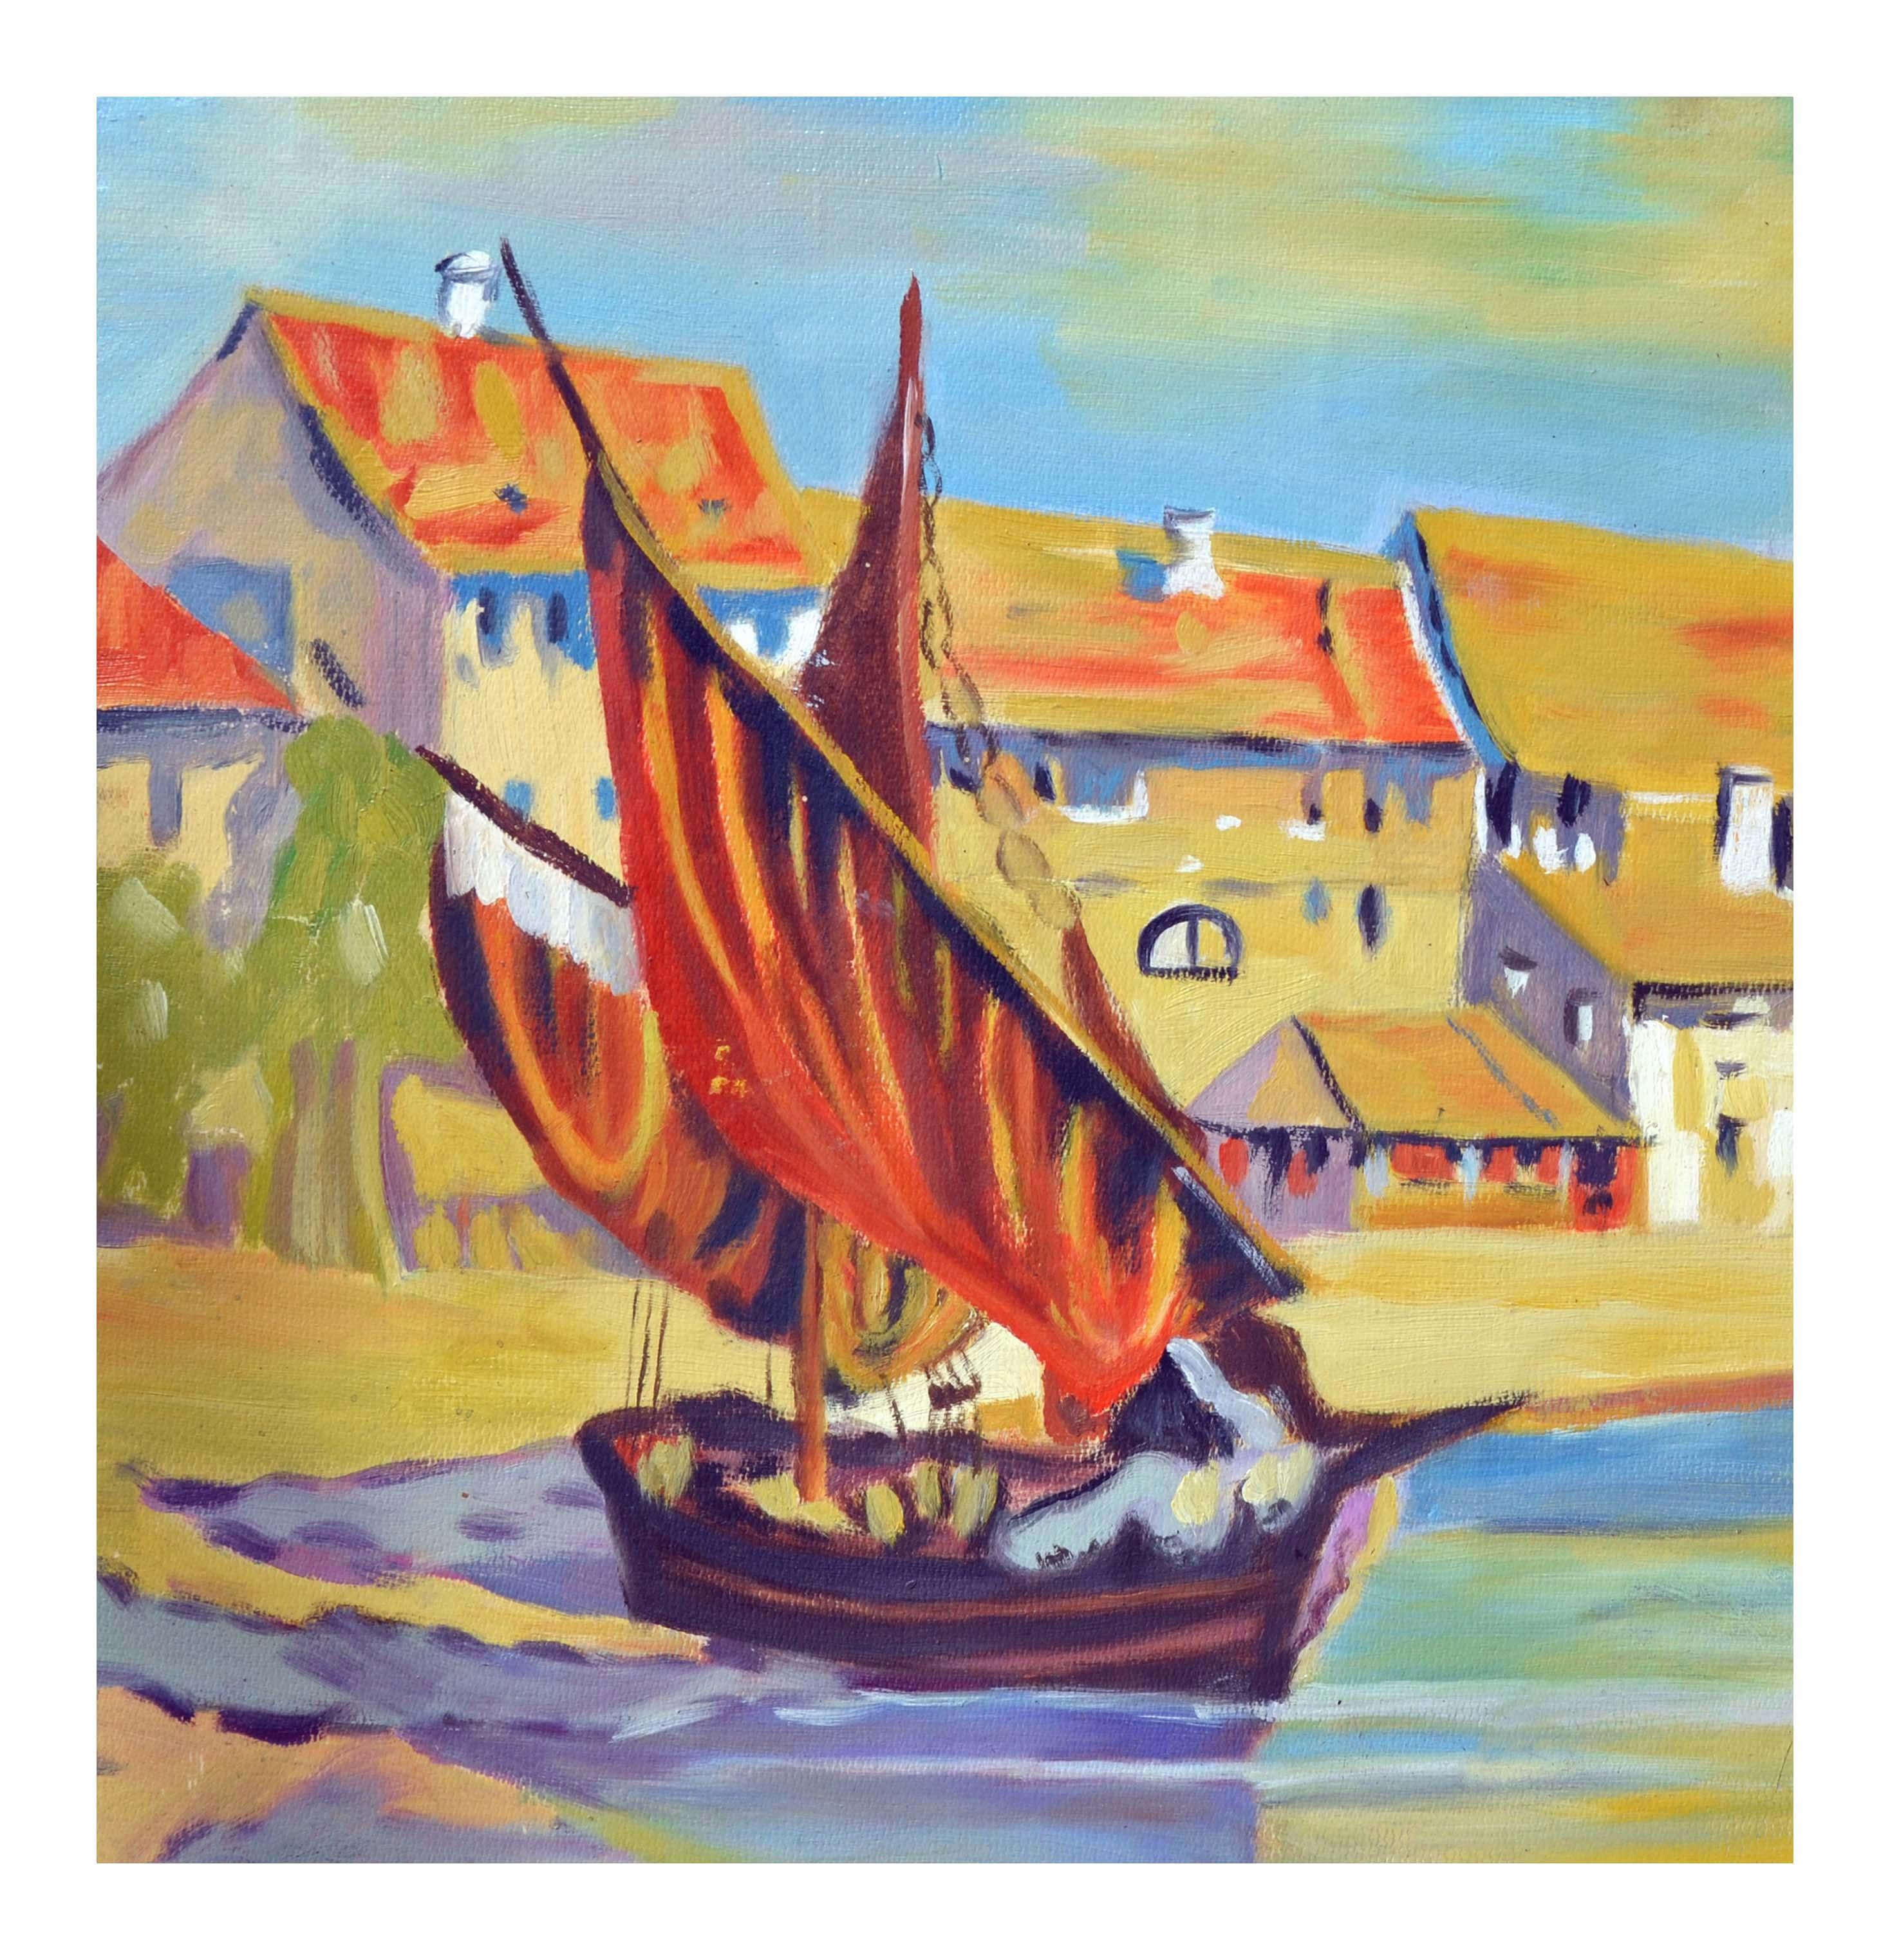 Wondefully vintage oil painting of venetian fishing boat in fauvist style, circa 1970. Unsigned. 
Unframed. 
Image size: 15